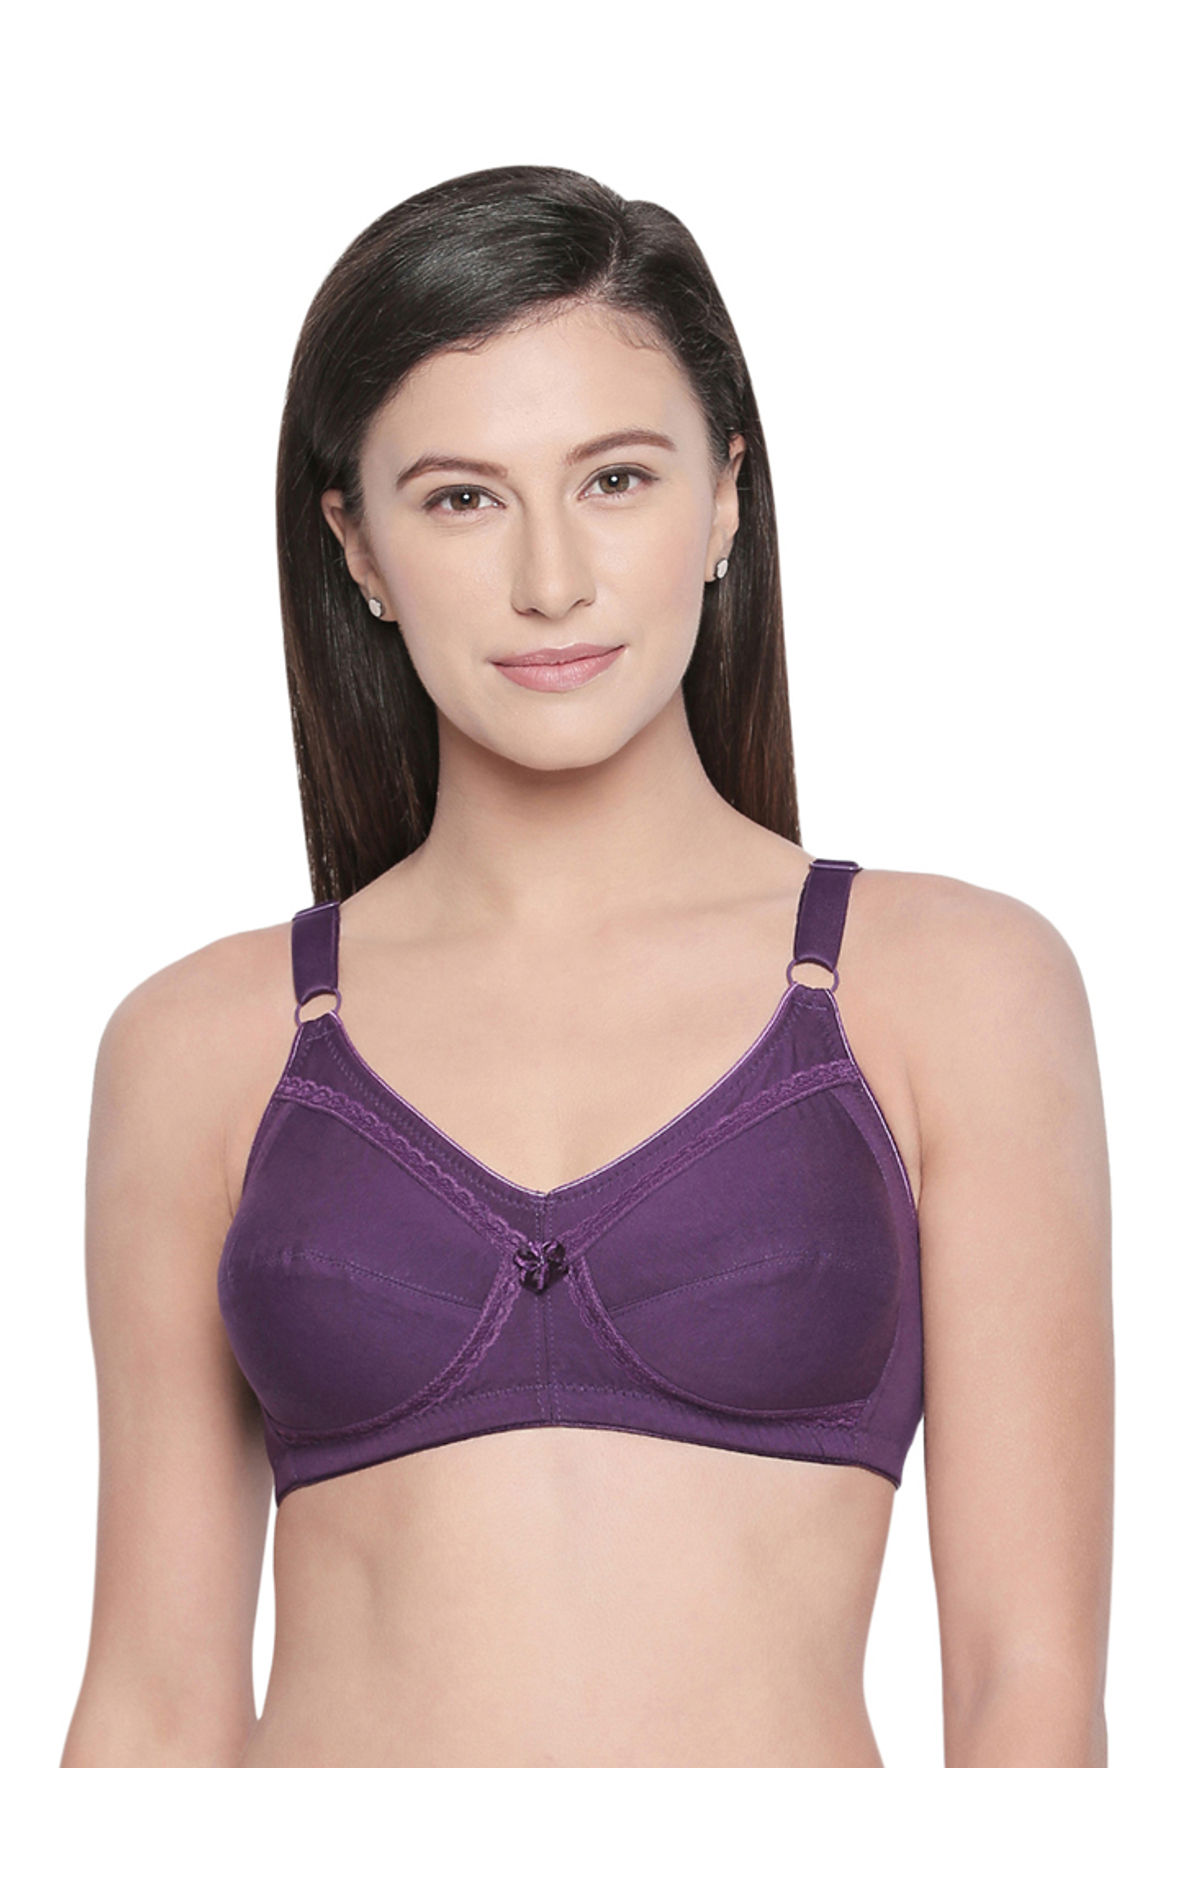 BODYCARE Pack of 1 B-C-D Cup Bra in Maroon Color - 5587MH